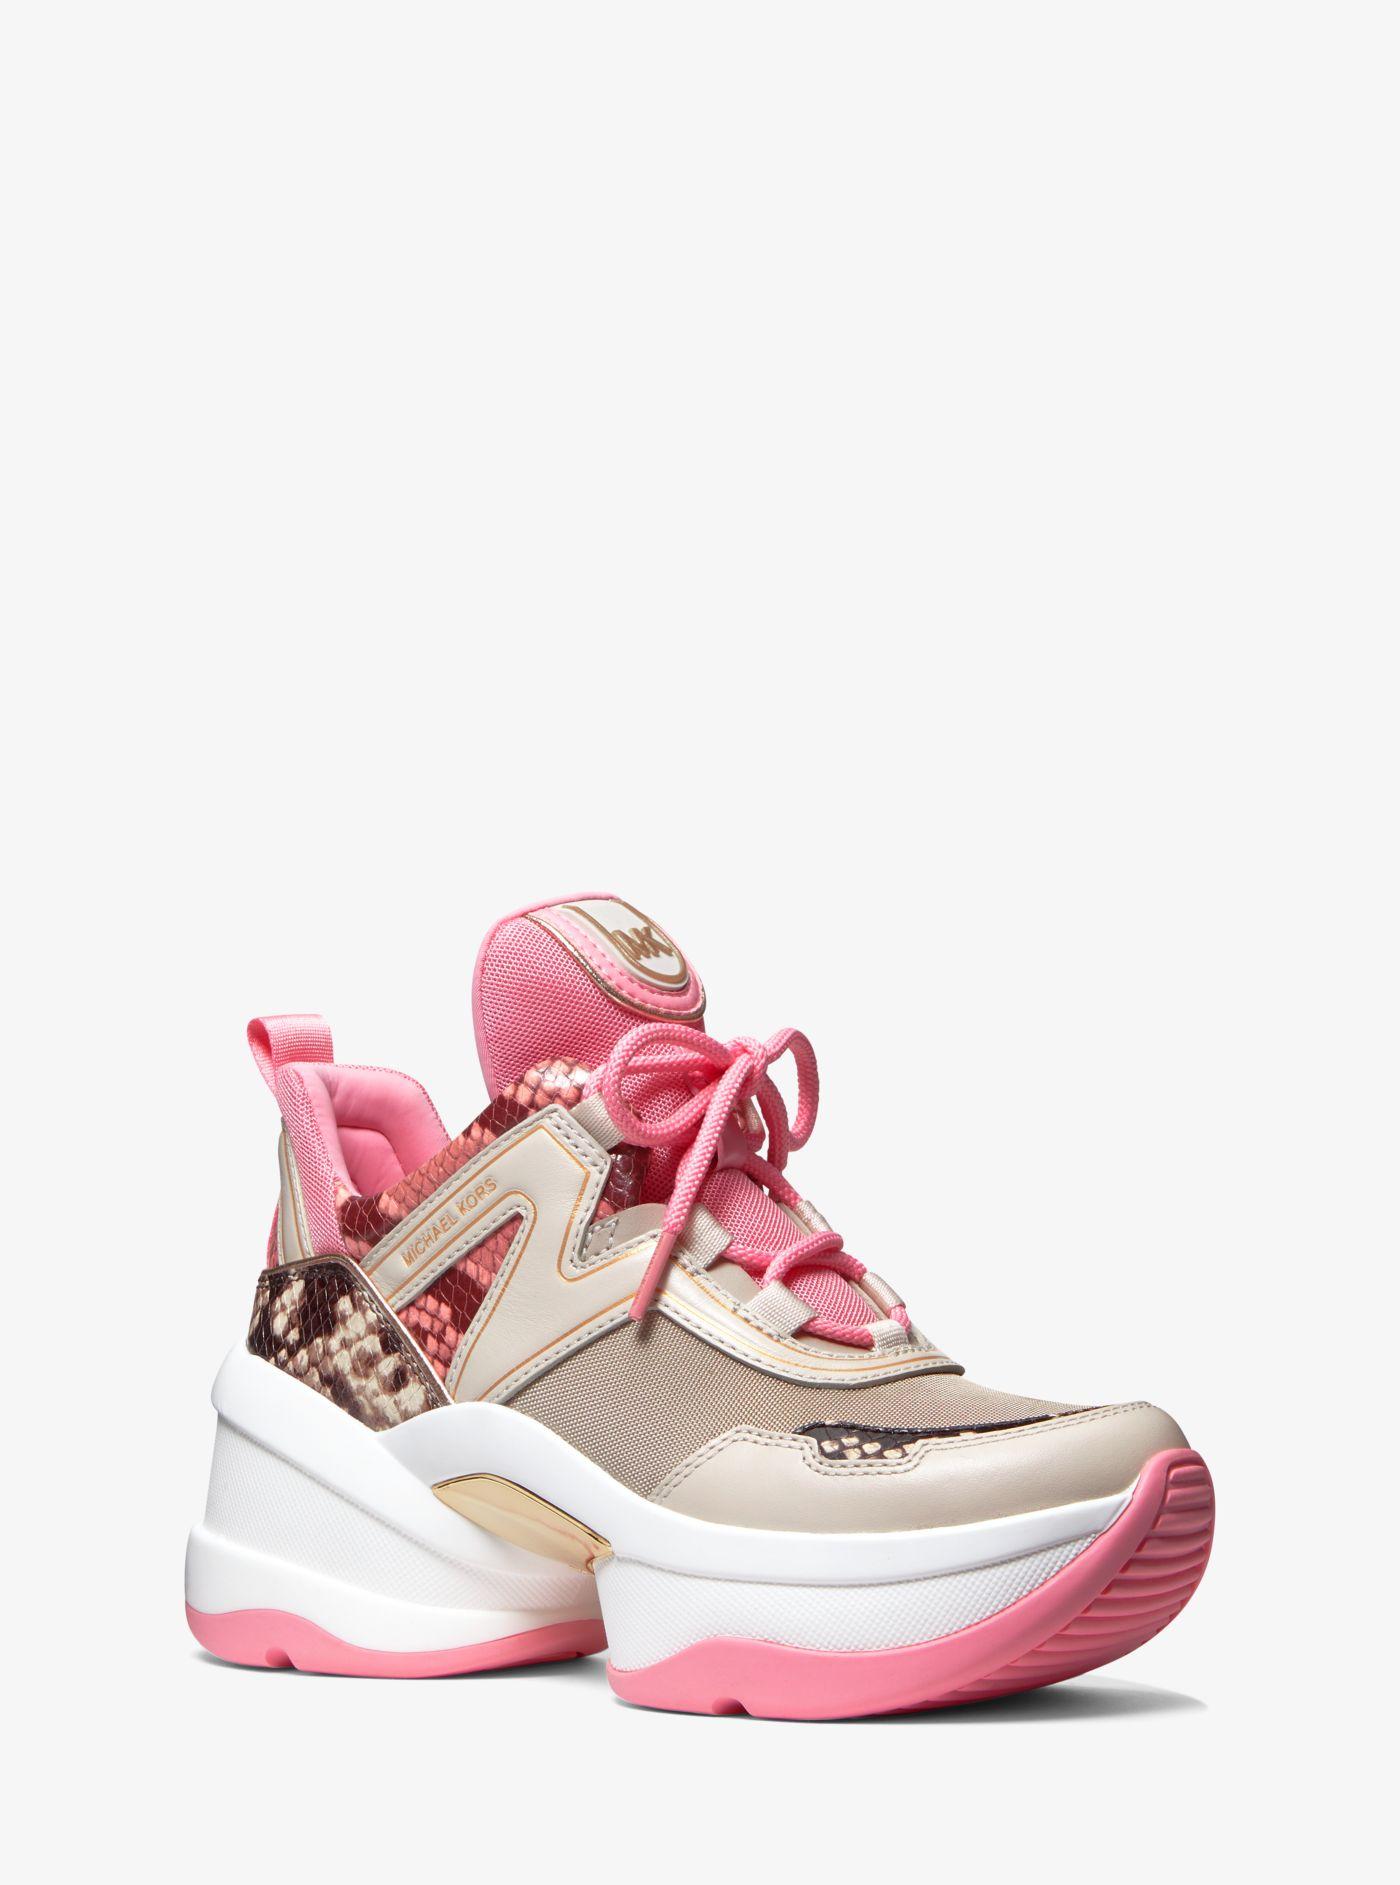 Michael Kors Olympia Two-tone Python Embossed Leather And Canvas Trainer in  Pink | Lyst